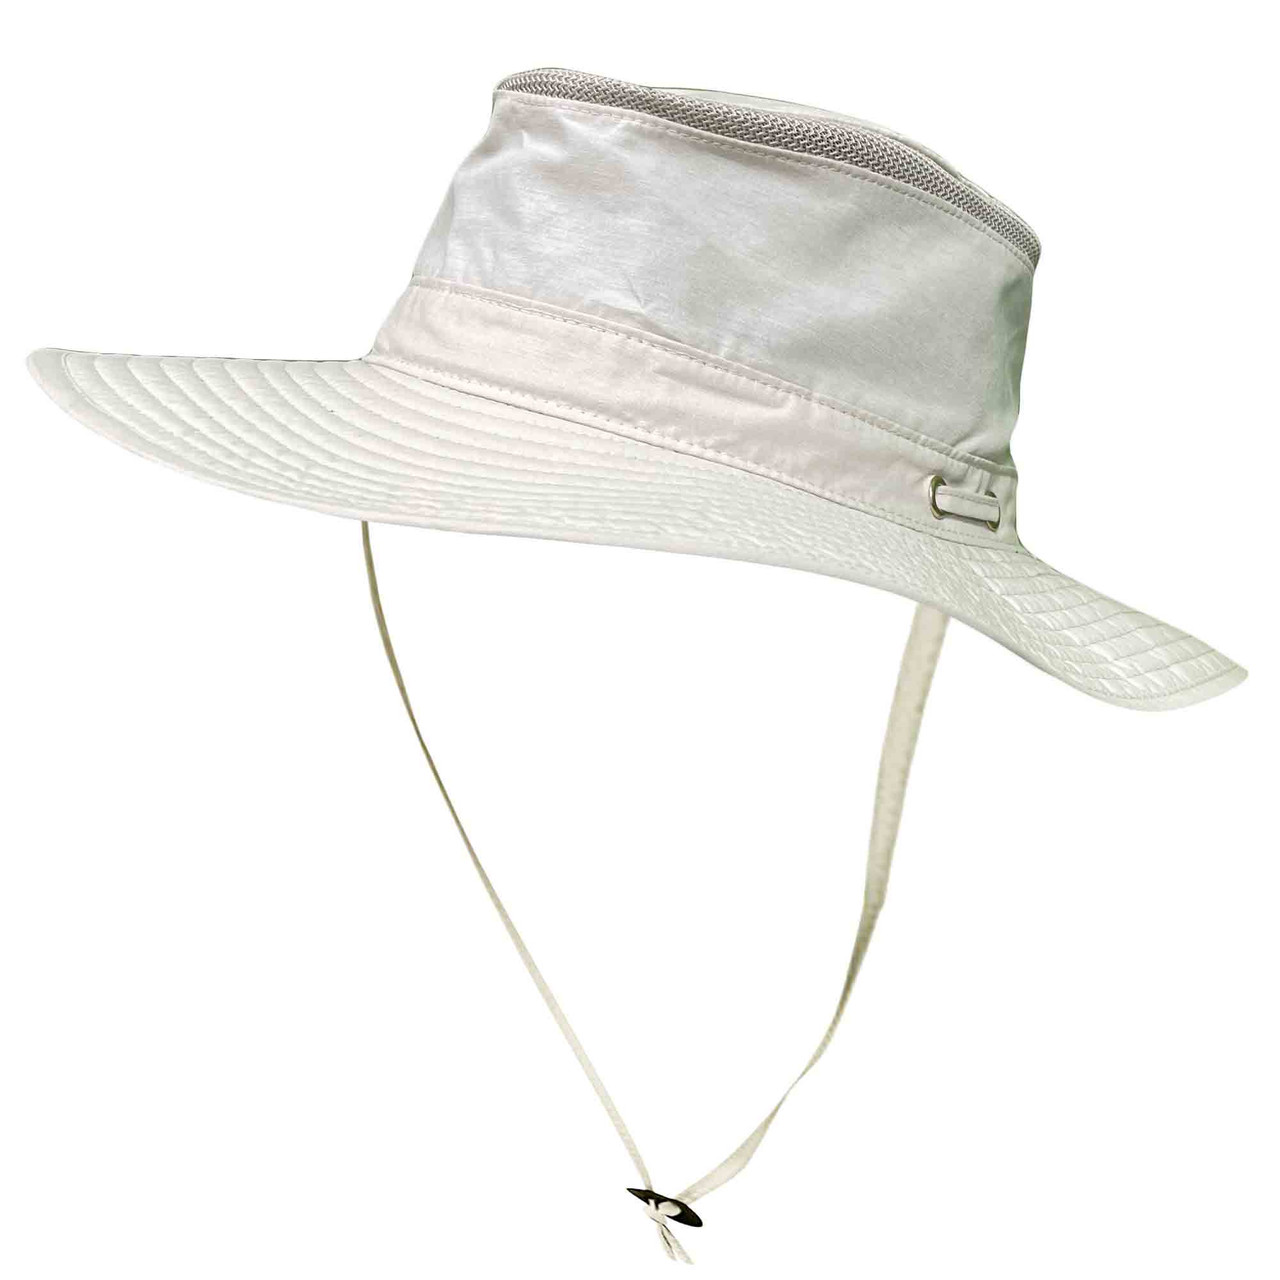 Outback Brimmed Sun Hat with SPF 50+ Protection